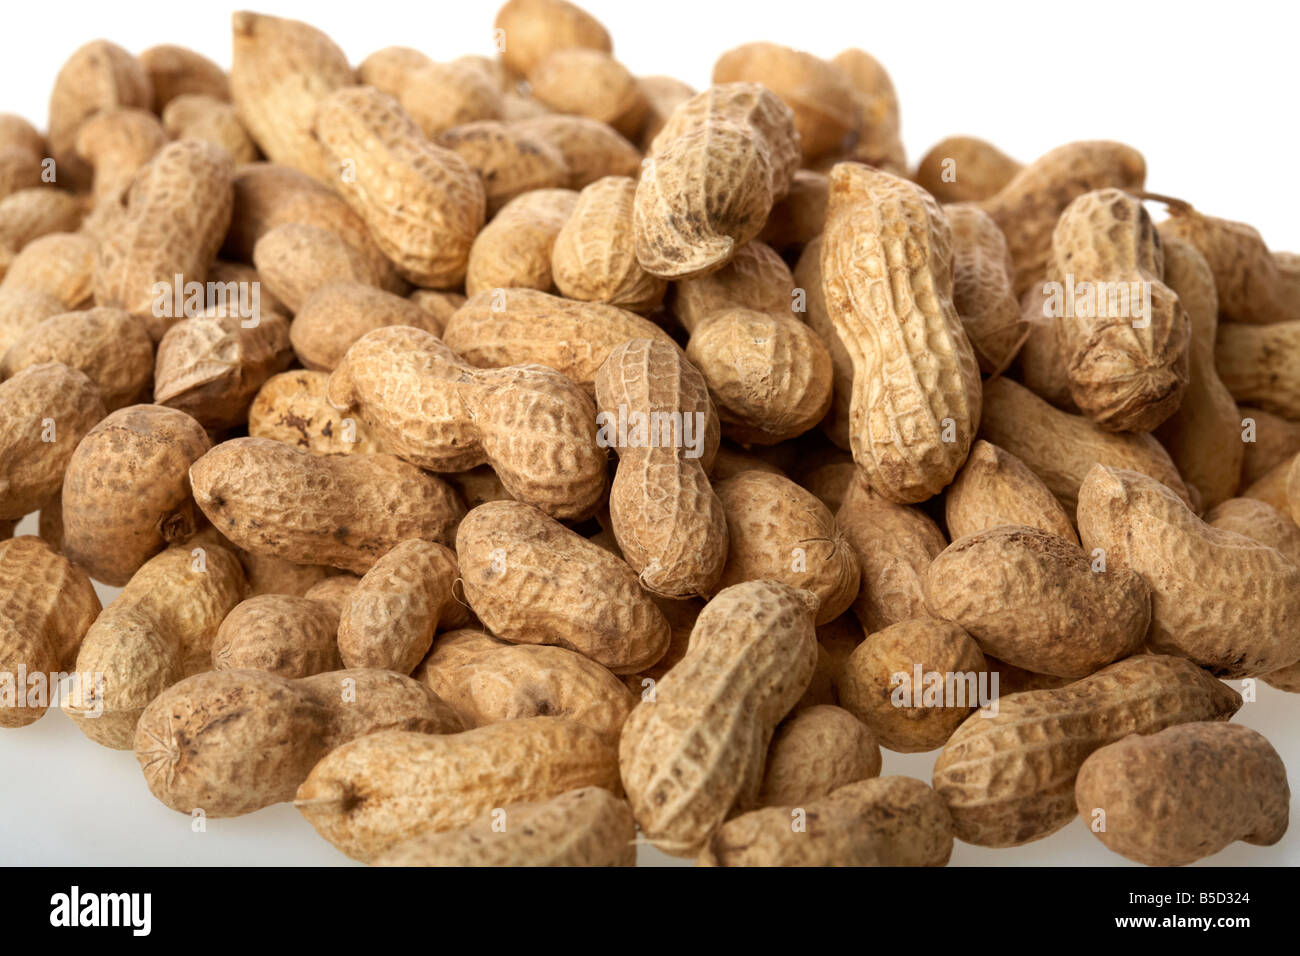 pile of peanuts in their shells Stock Photo